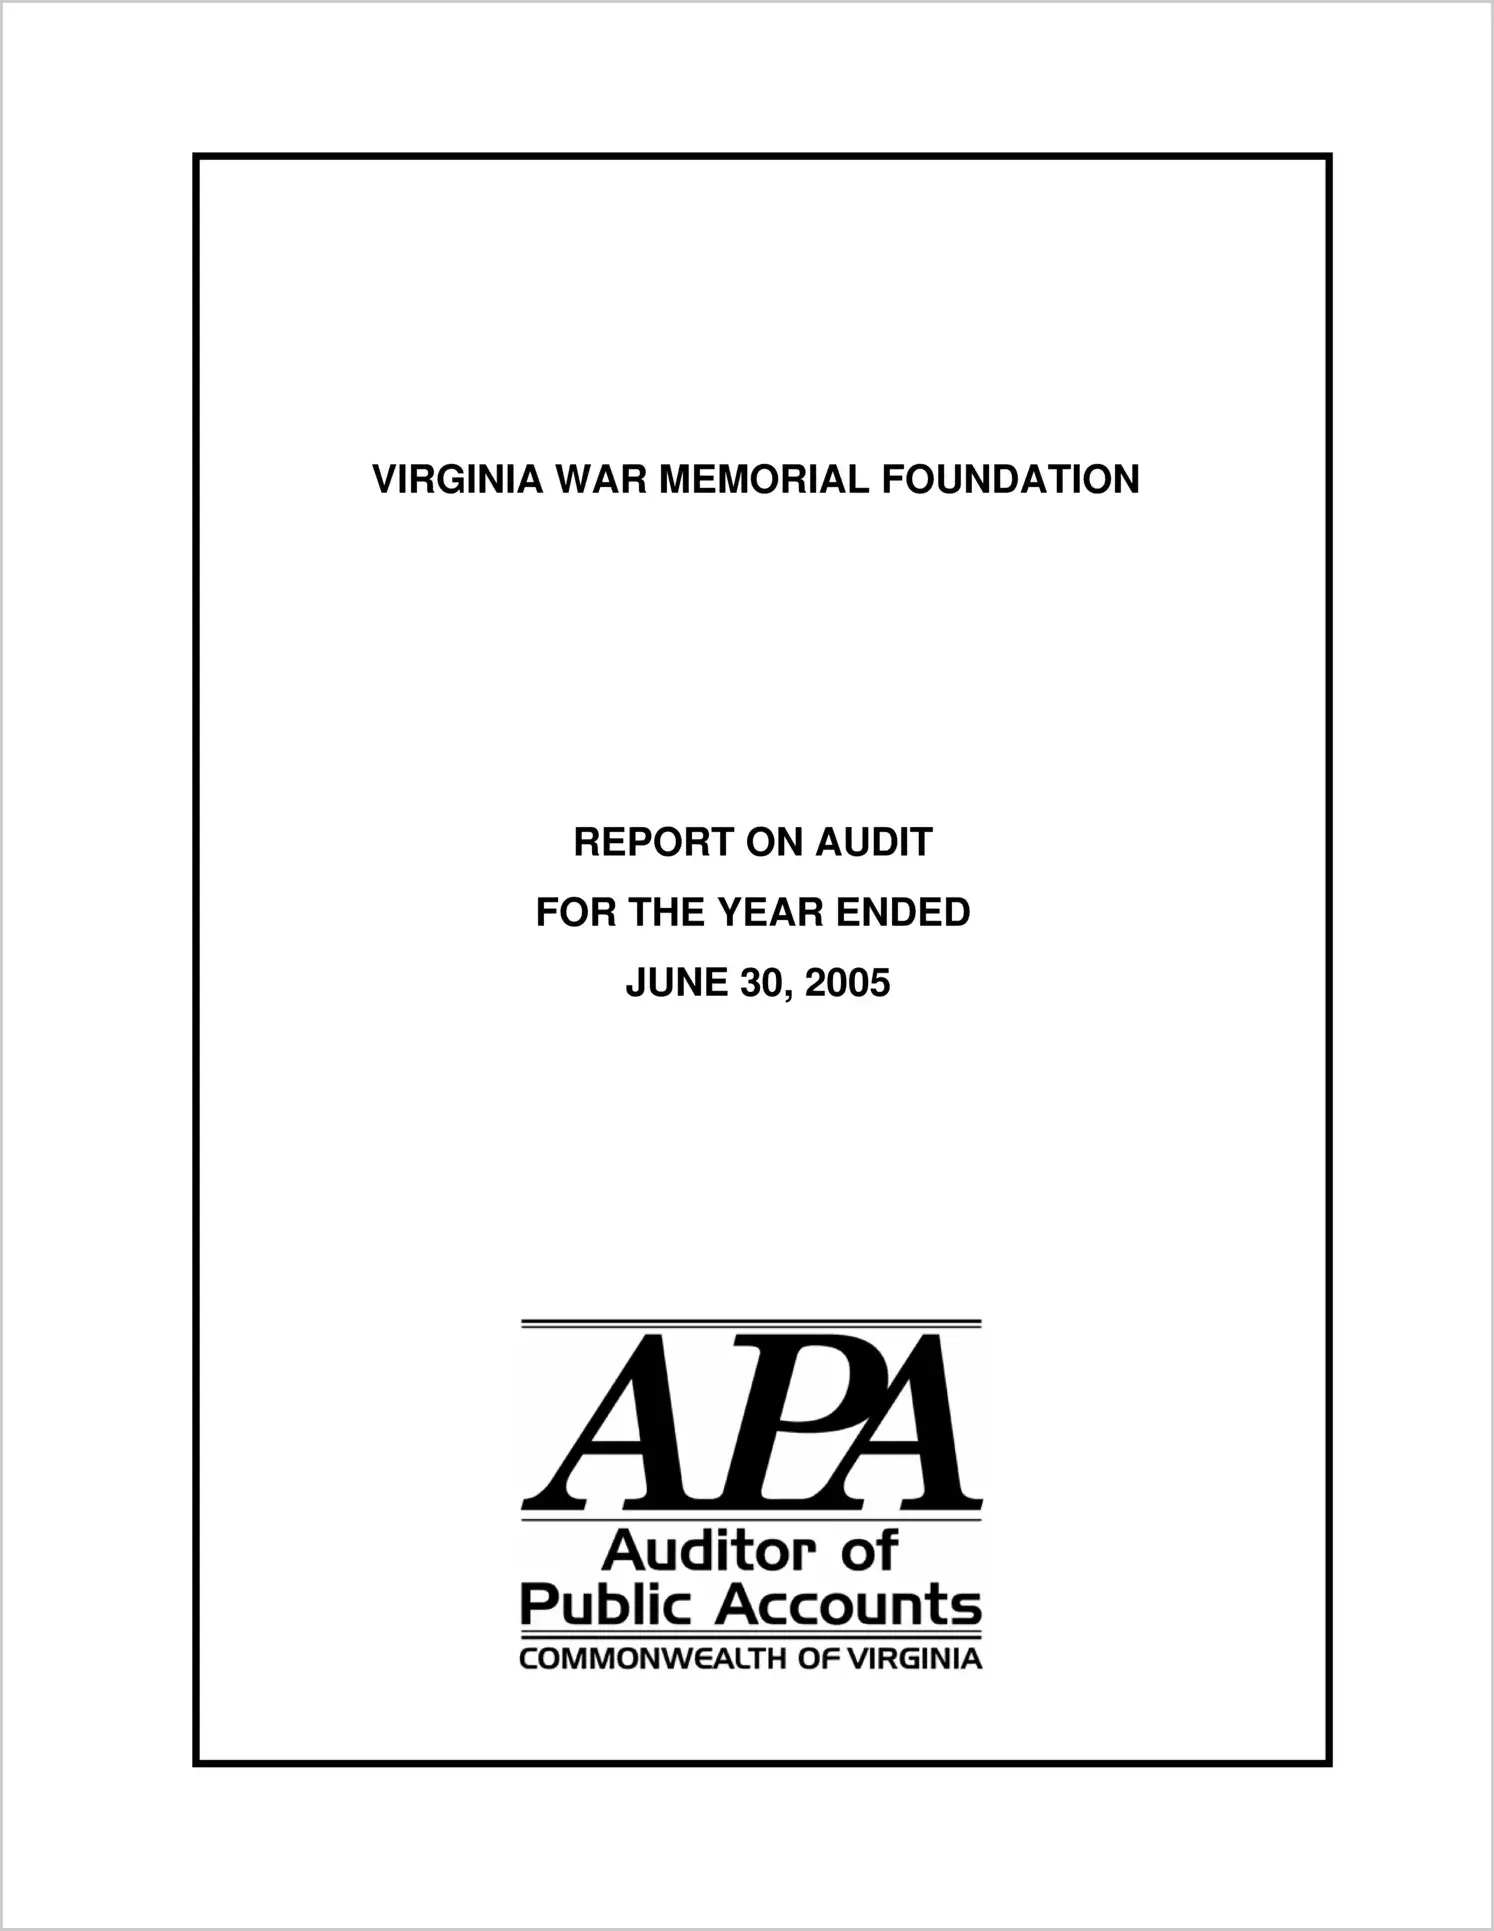 Virginia War Memorial Foundation for the year ended June 30, 2004